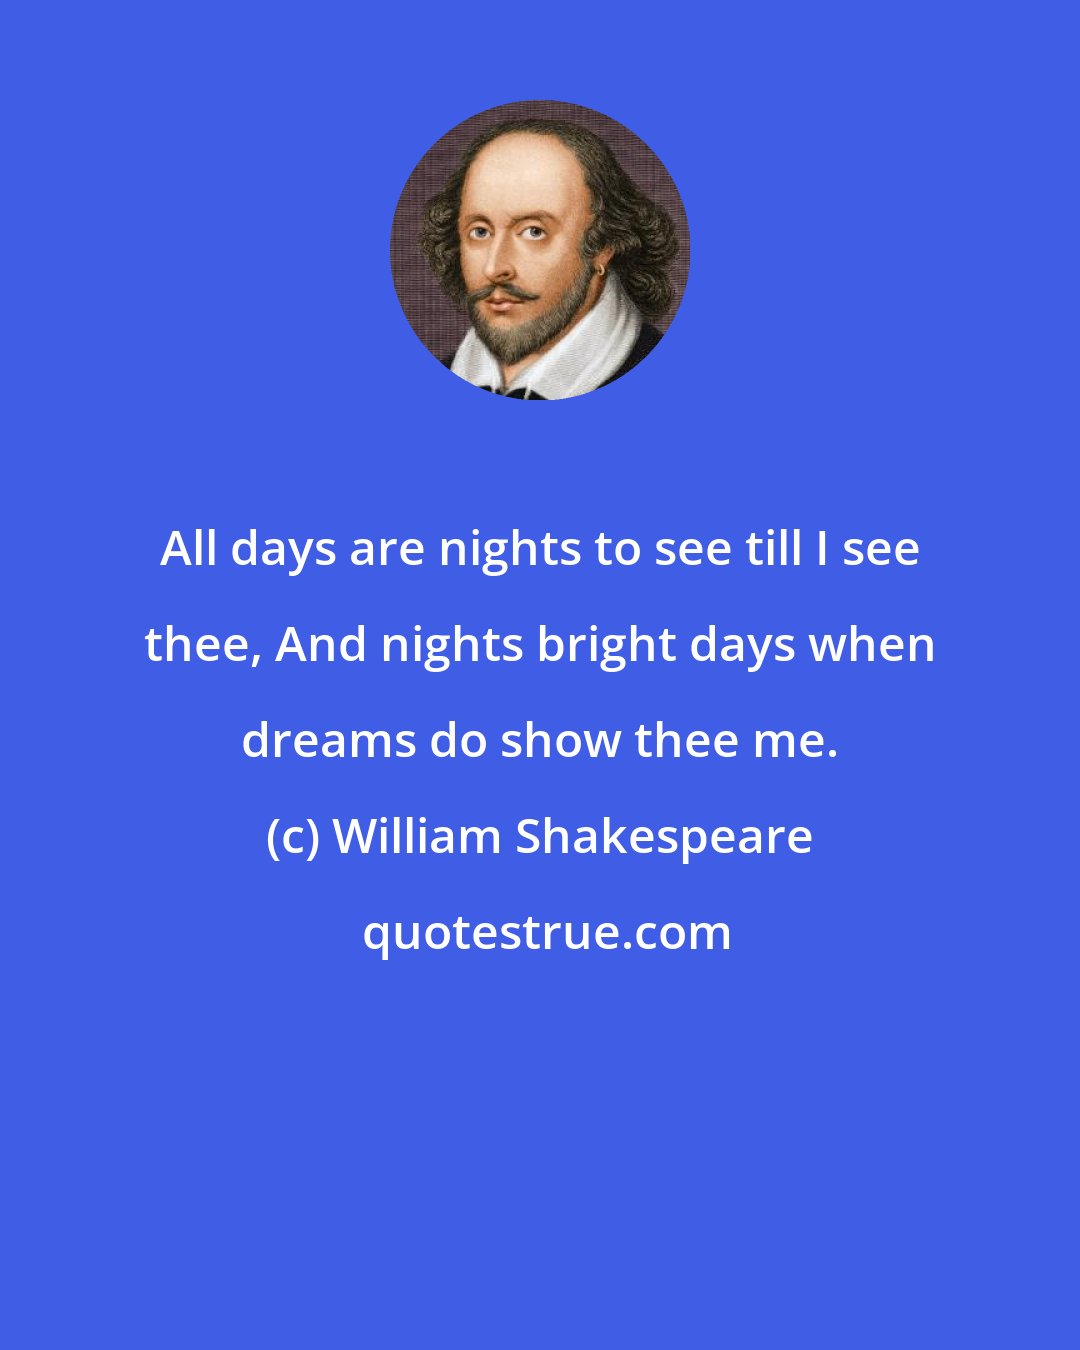 William Shakespeare: All days are nights to see till I see thee, And nights bright days when dreams do show thee me.